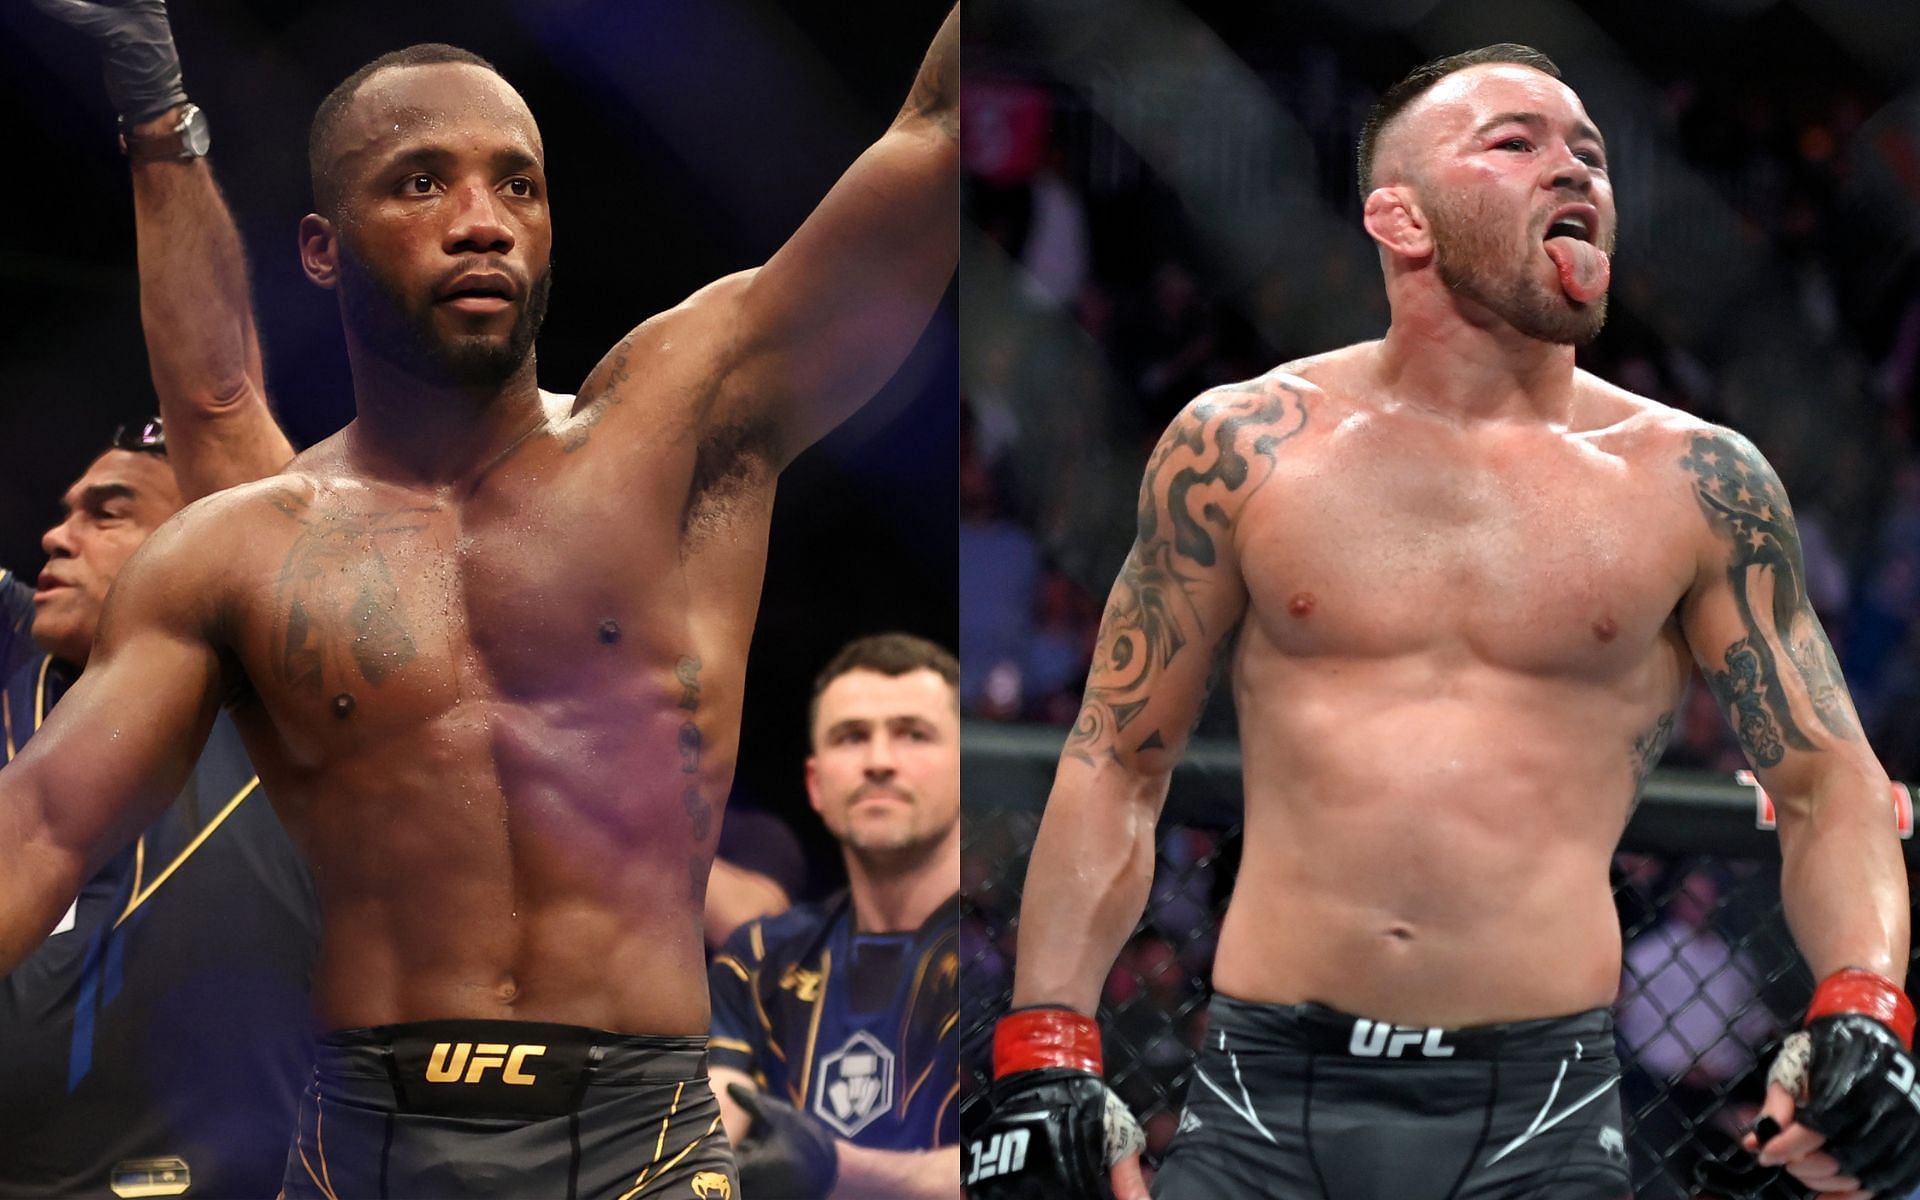 Leon Edwards (left) and Colby Covington (right) (Image credits Getty Images)